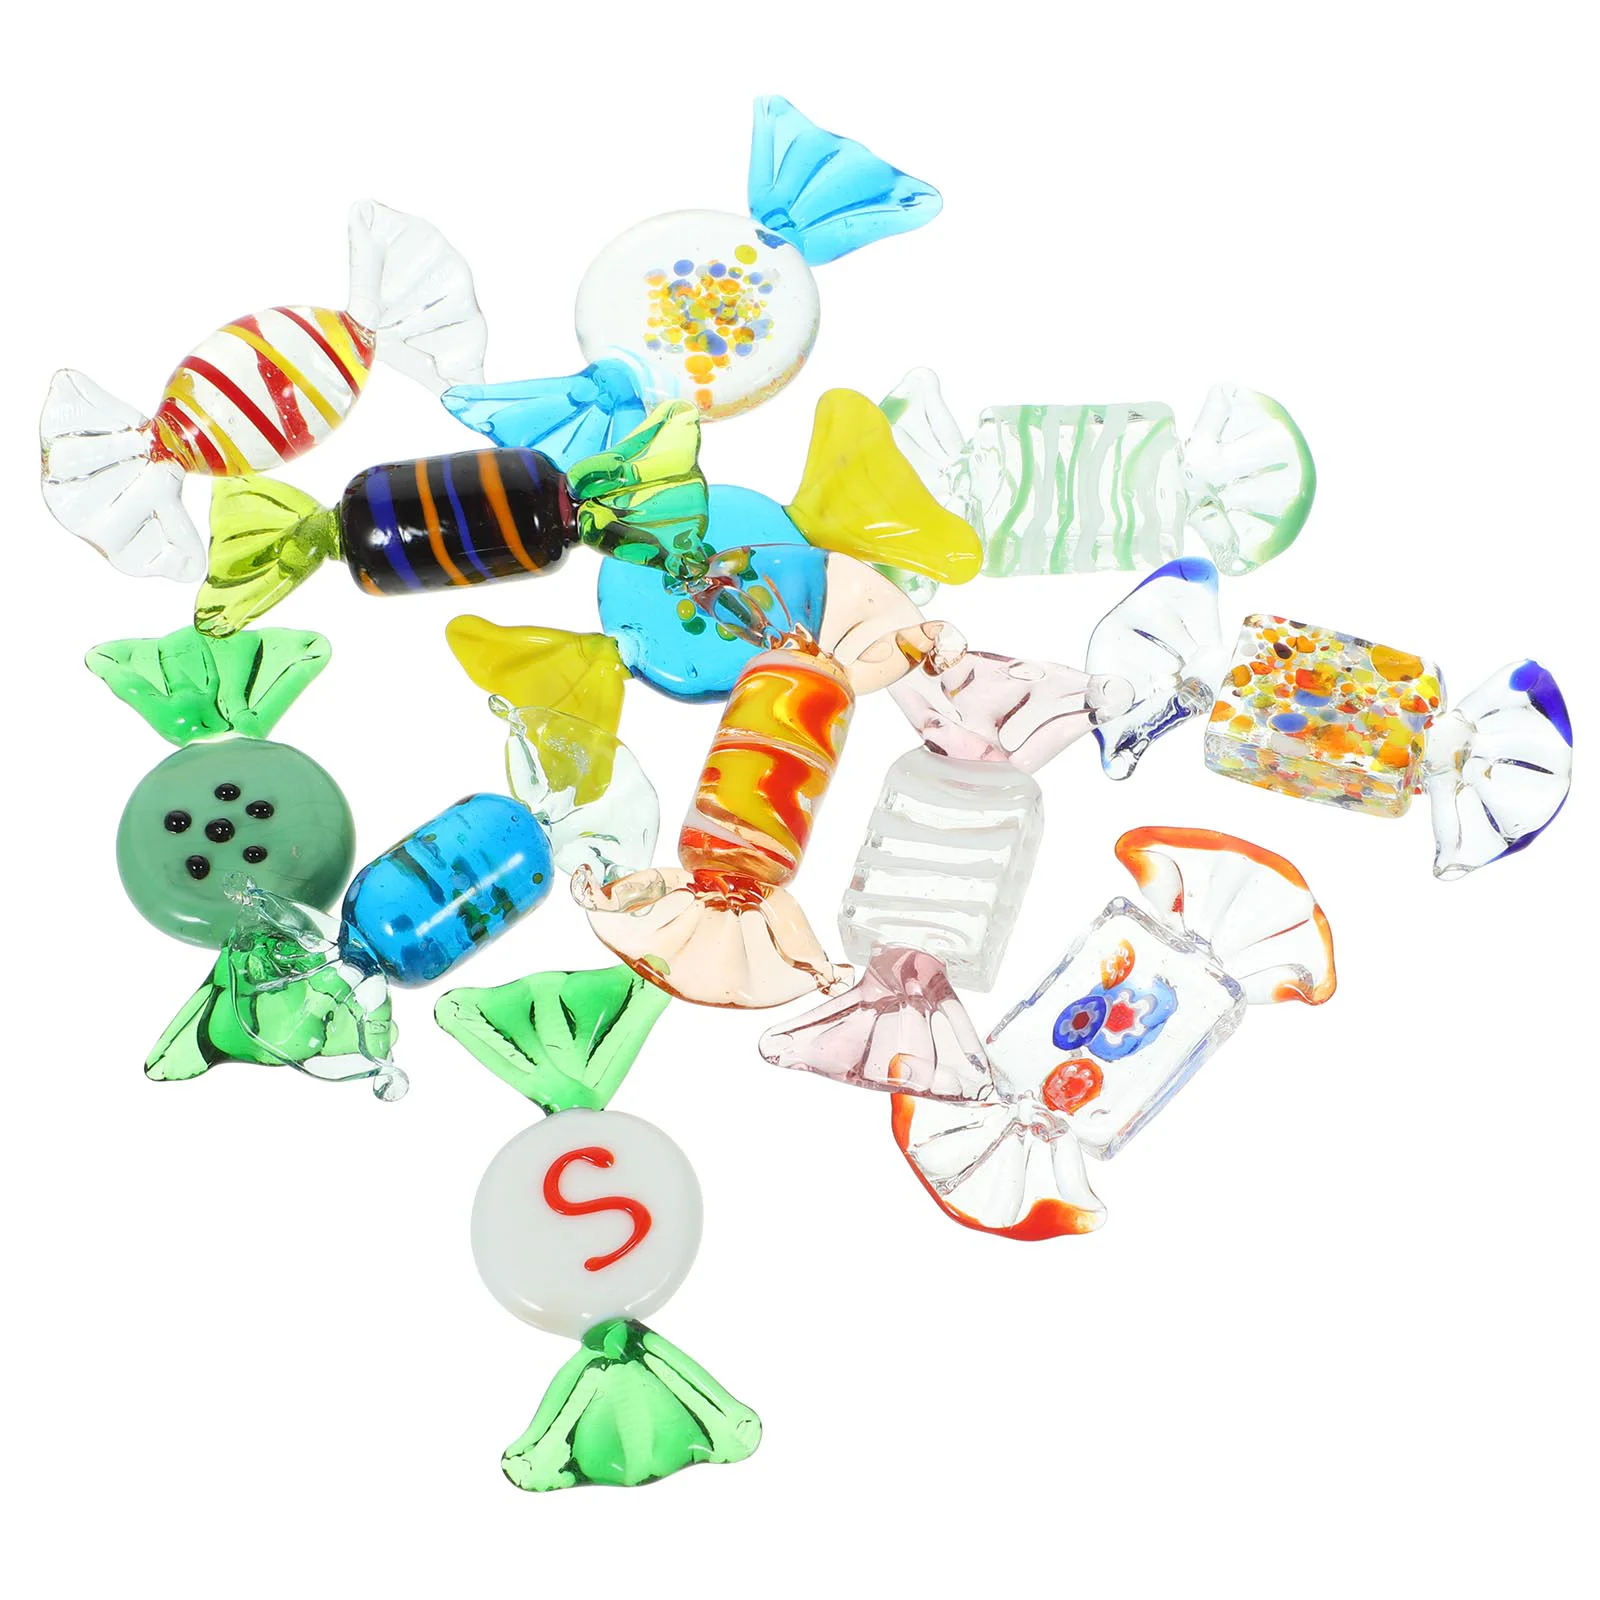 

12 Pcs Colored Candies Xmas Decorations Indoors Desktop Creative Candy Model Family Glass Chic Office Decorative Prop Funny